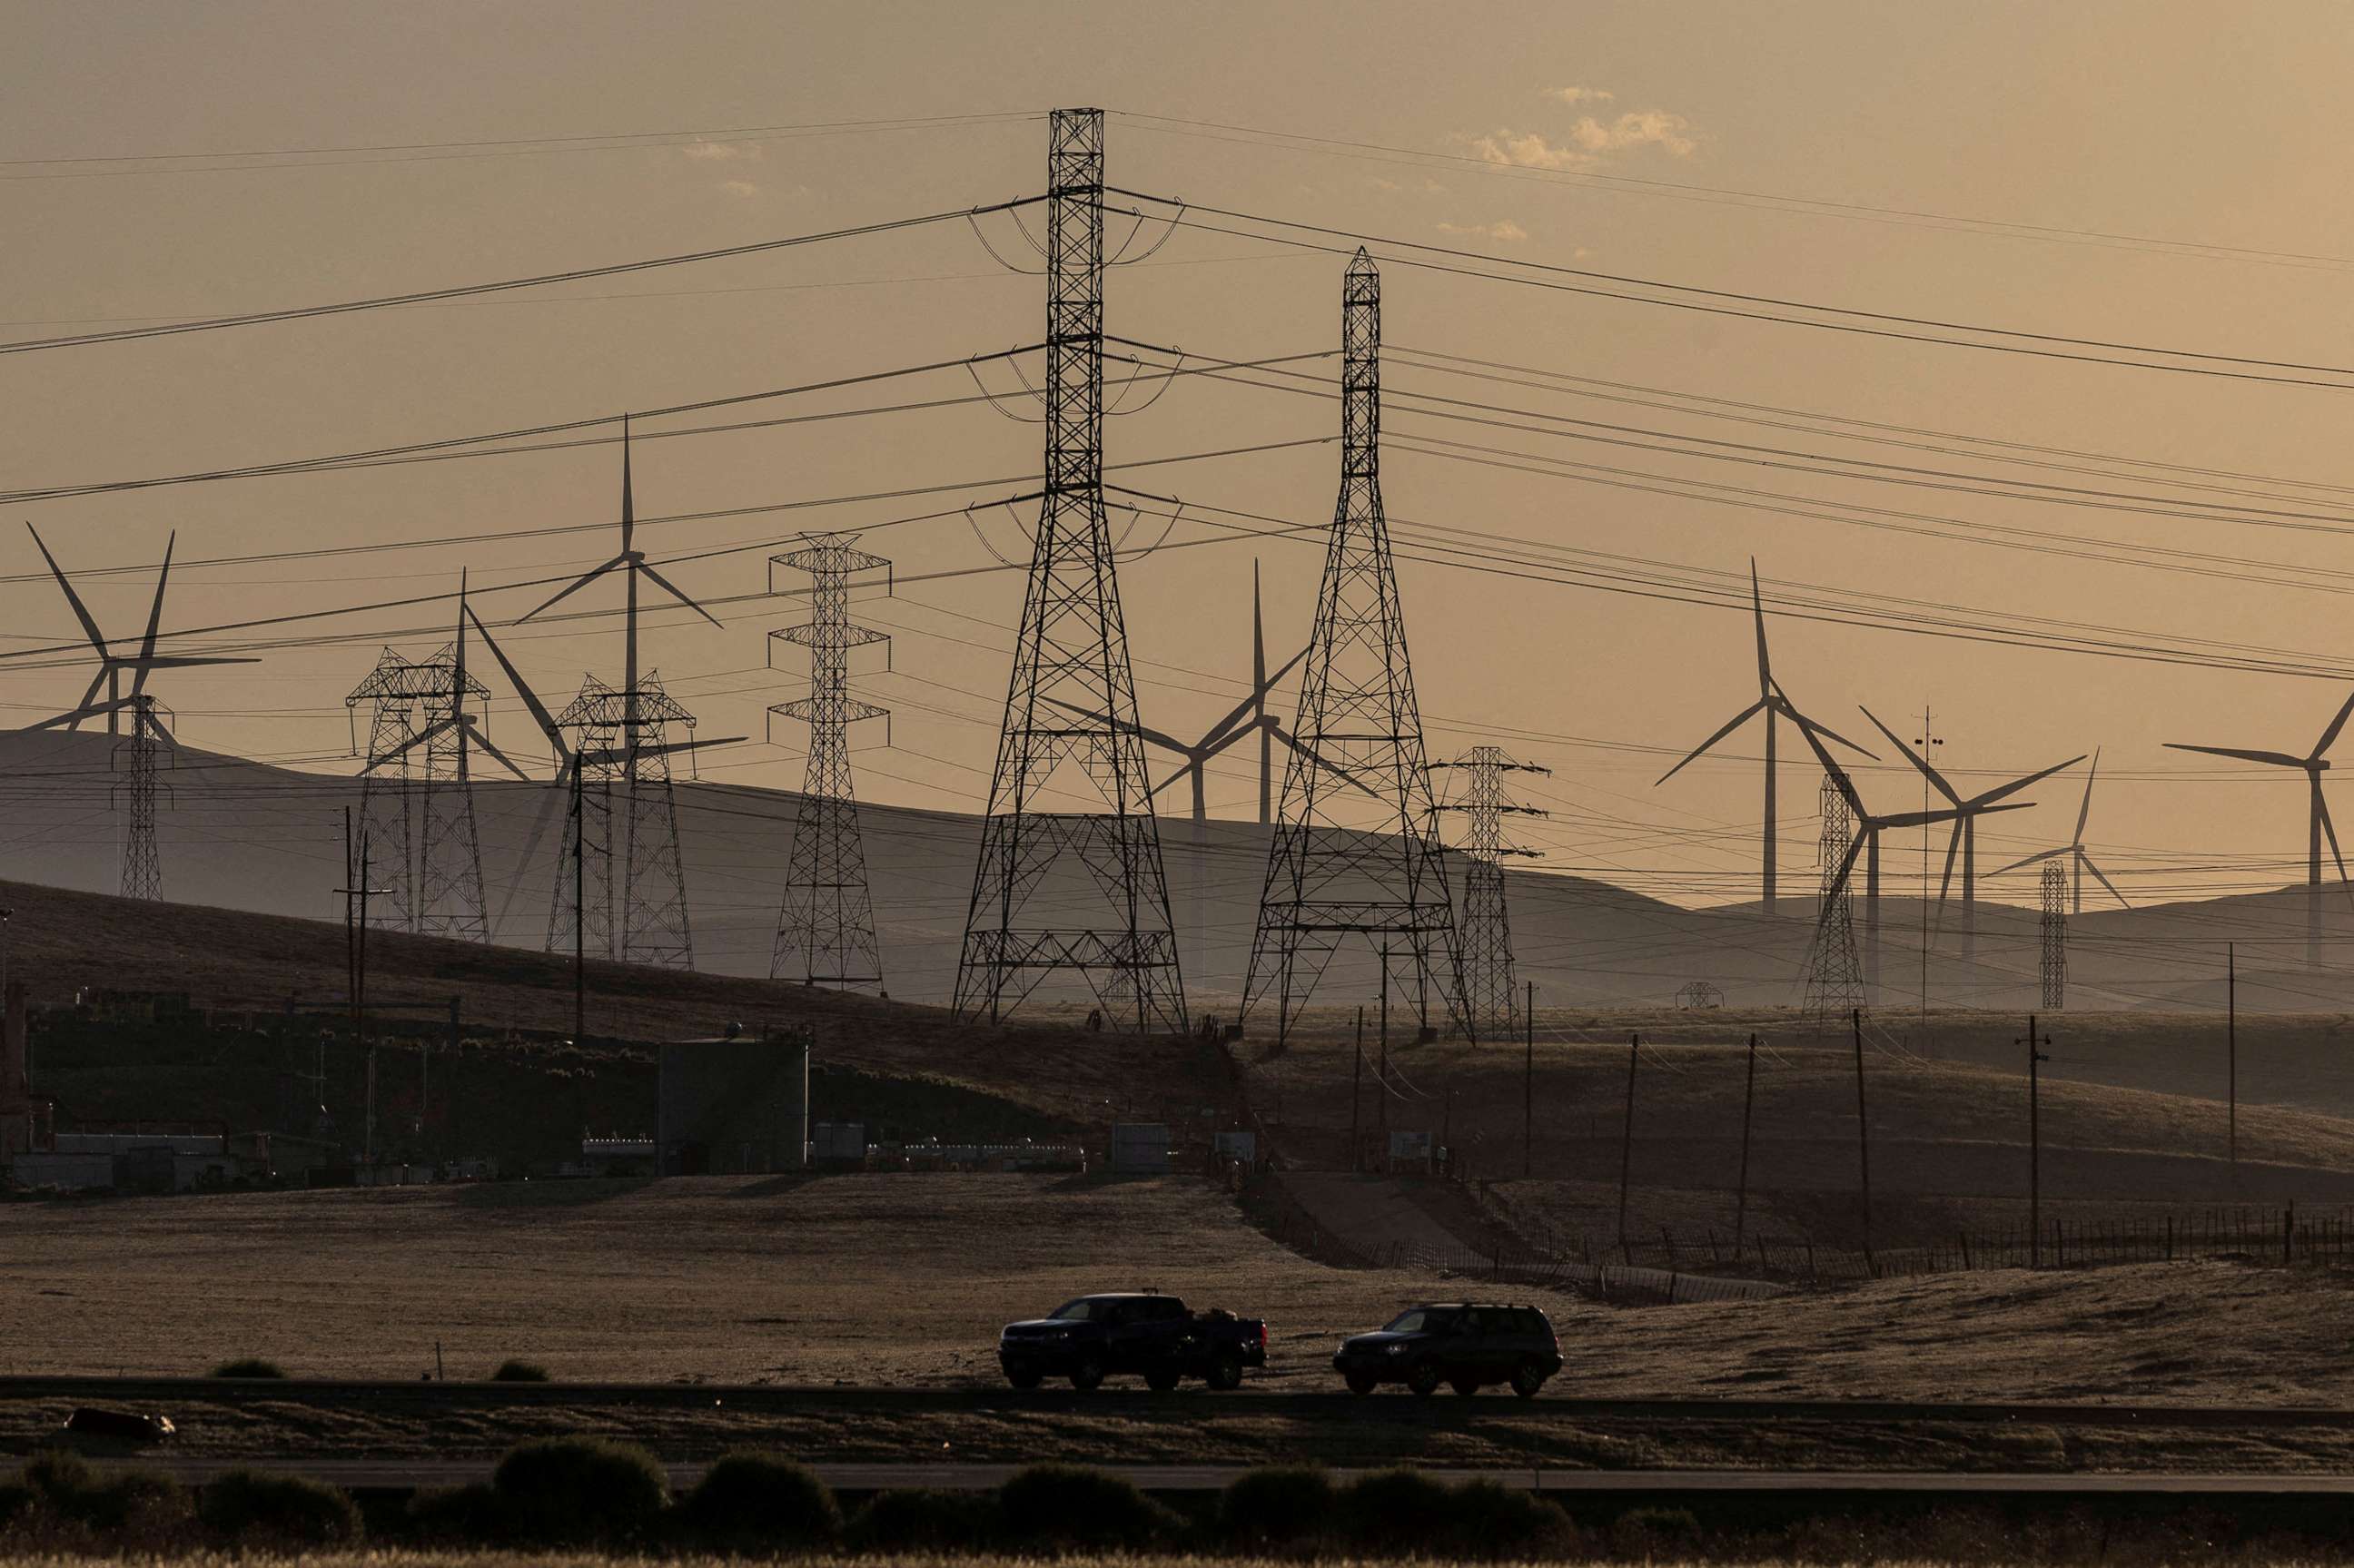 PHOTO: In this Aug. 17, 2022, file photo, windmills and power lines are shown near Tracy, Calif. 